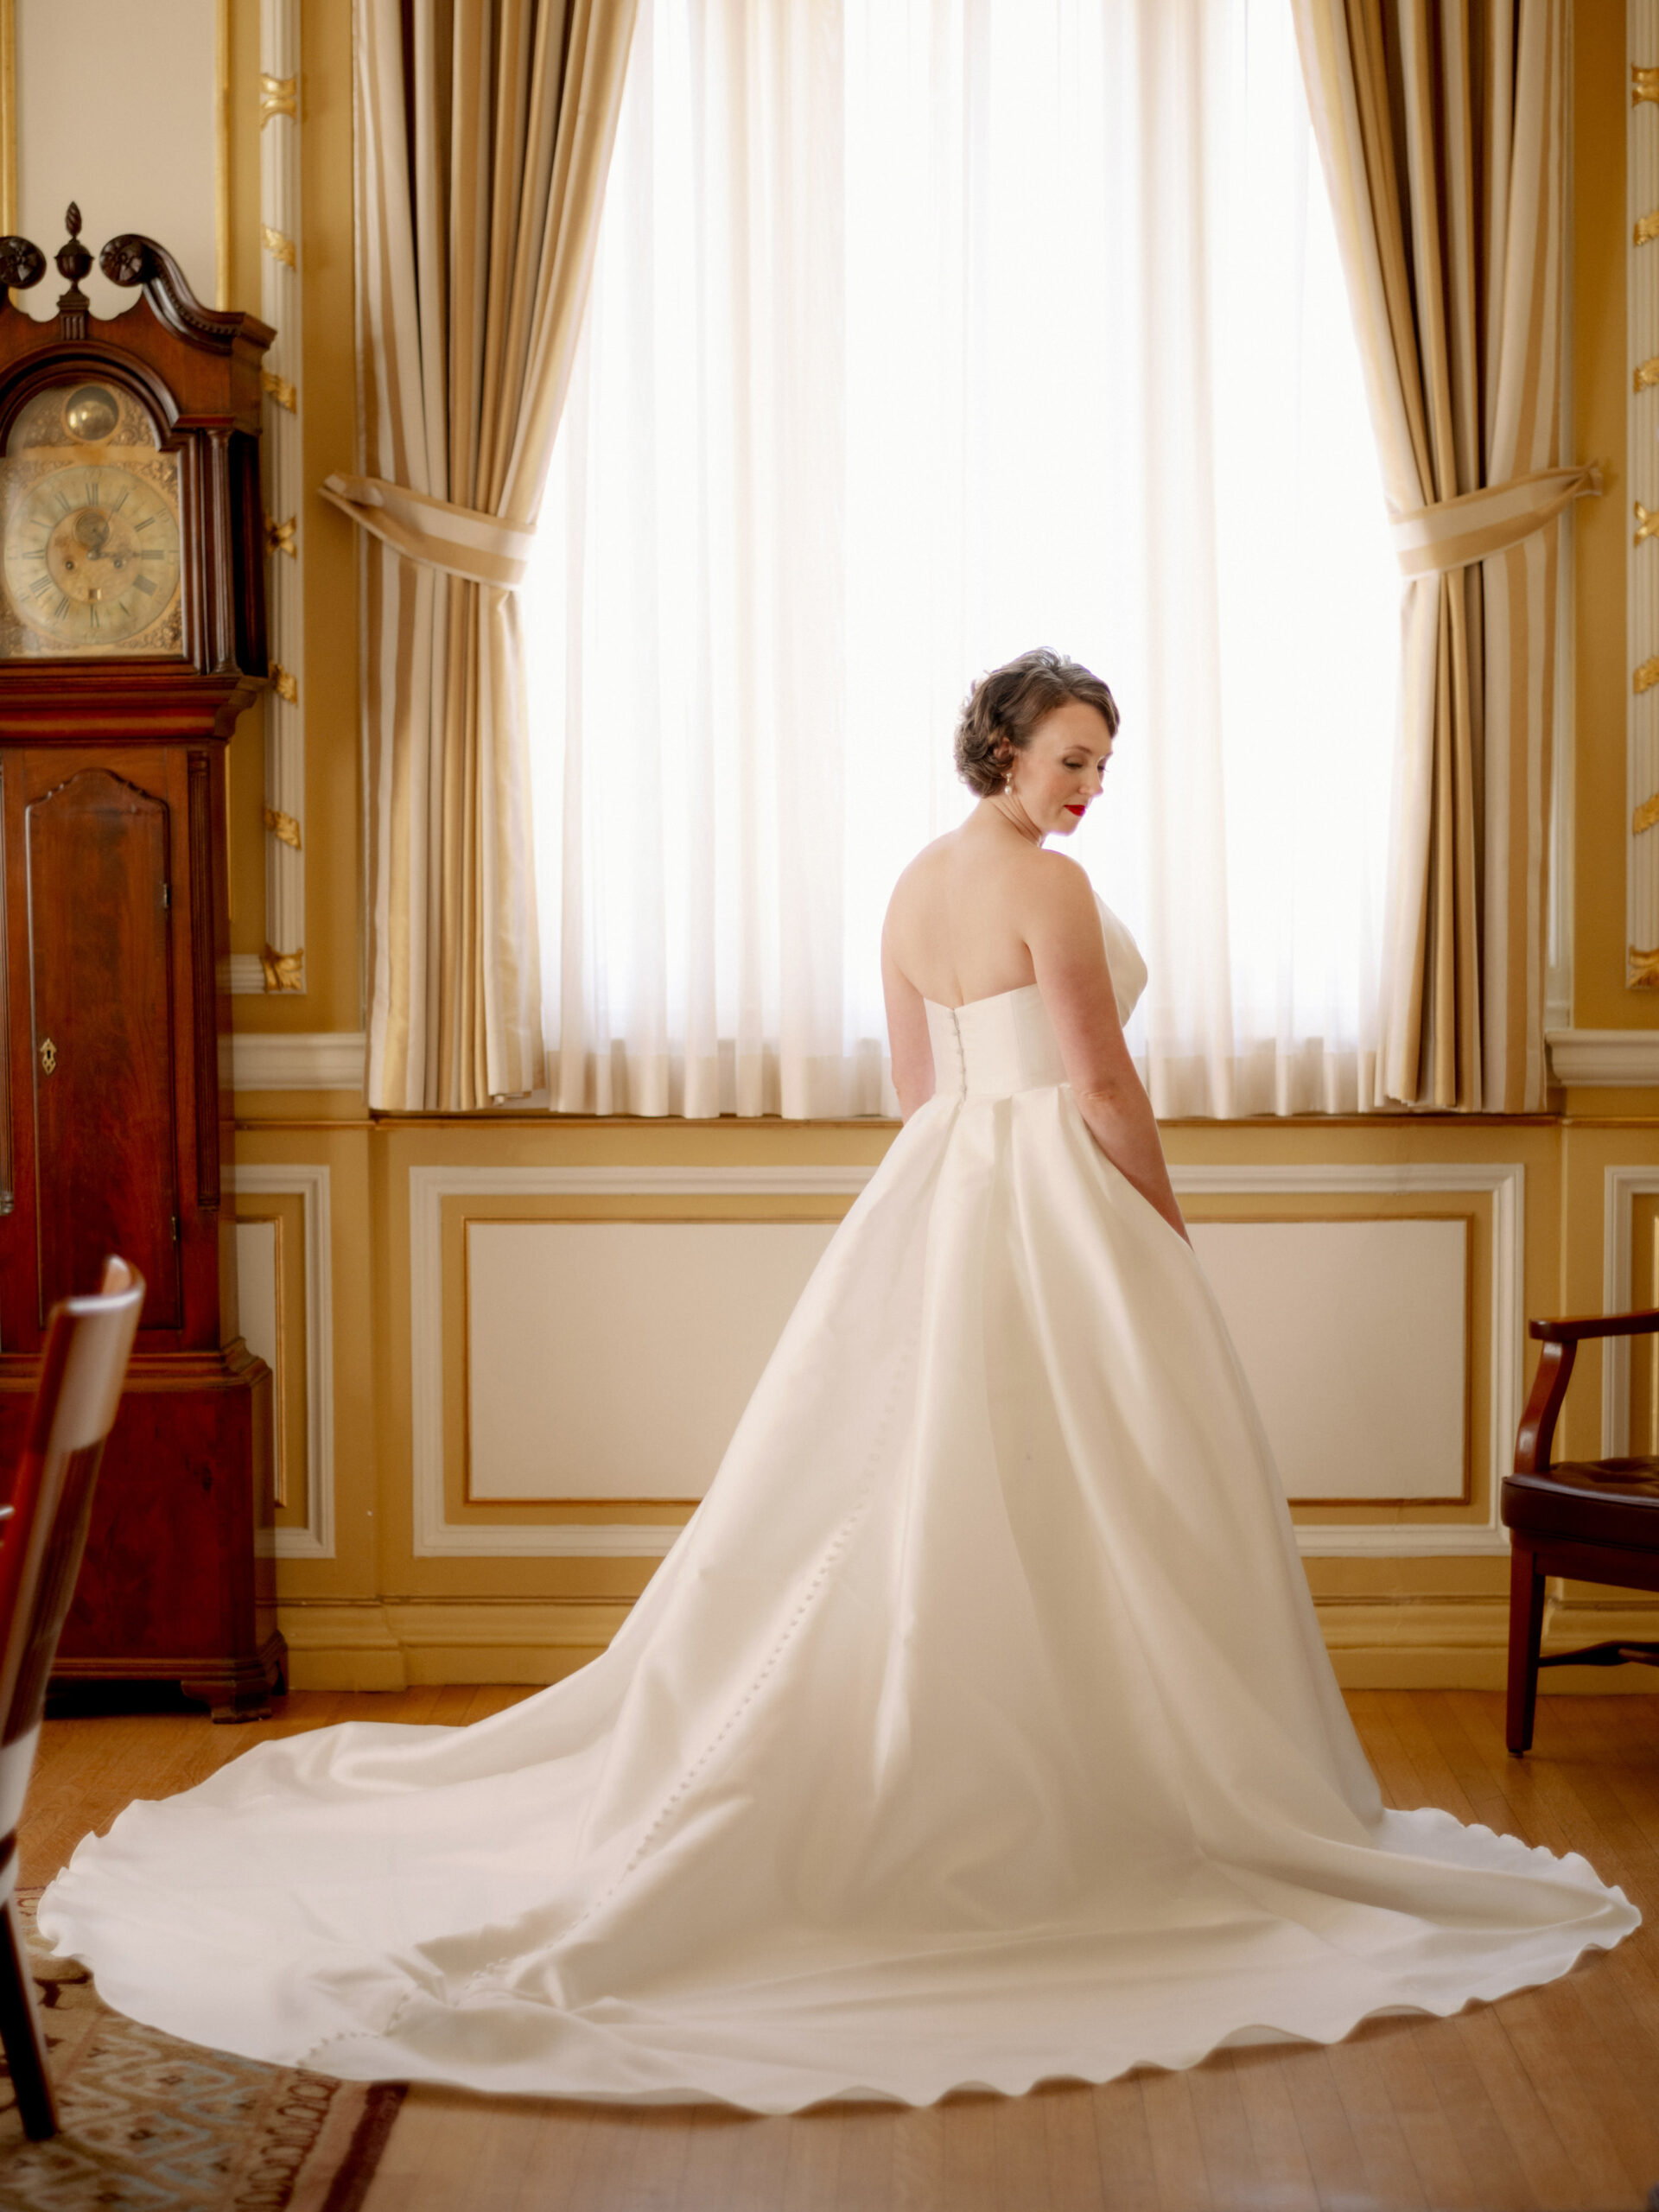 Editorial image of the bride in her wedding dress. Wedding poses image by Jenny Fu Studio